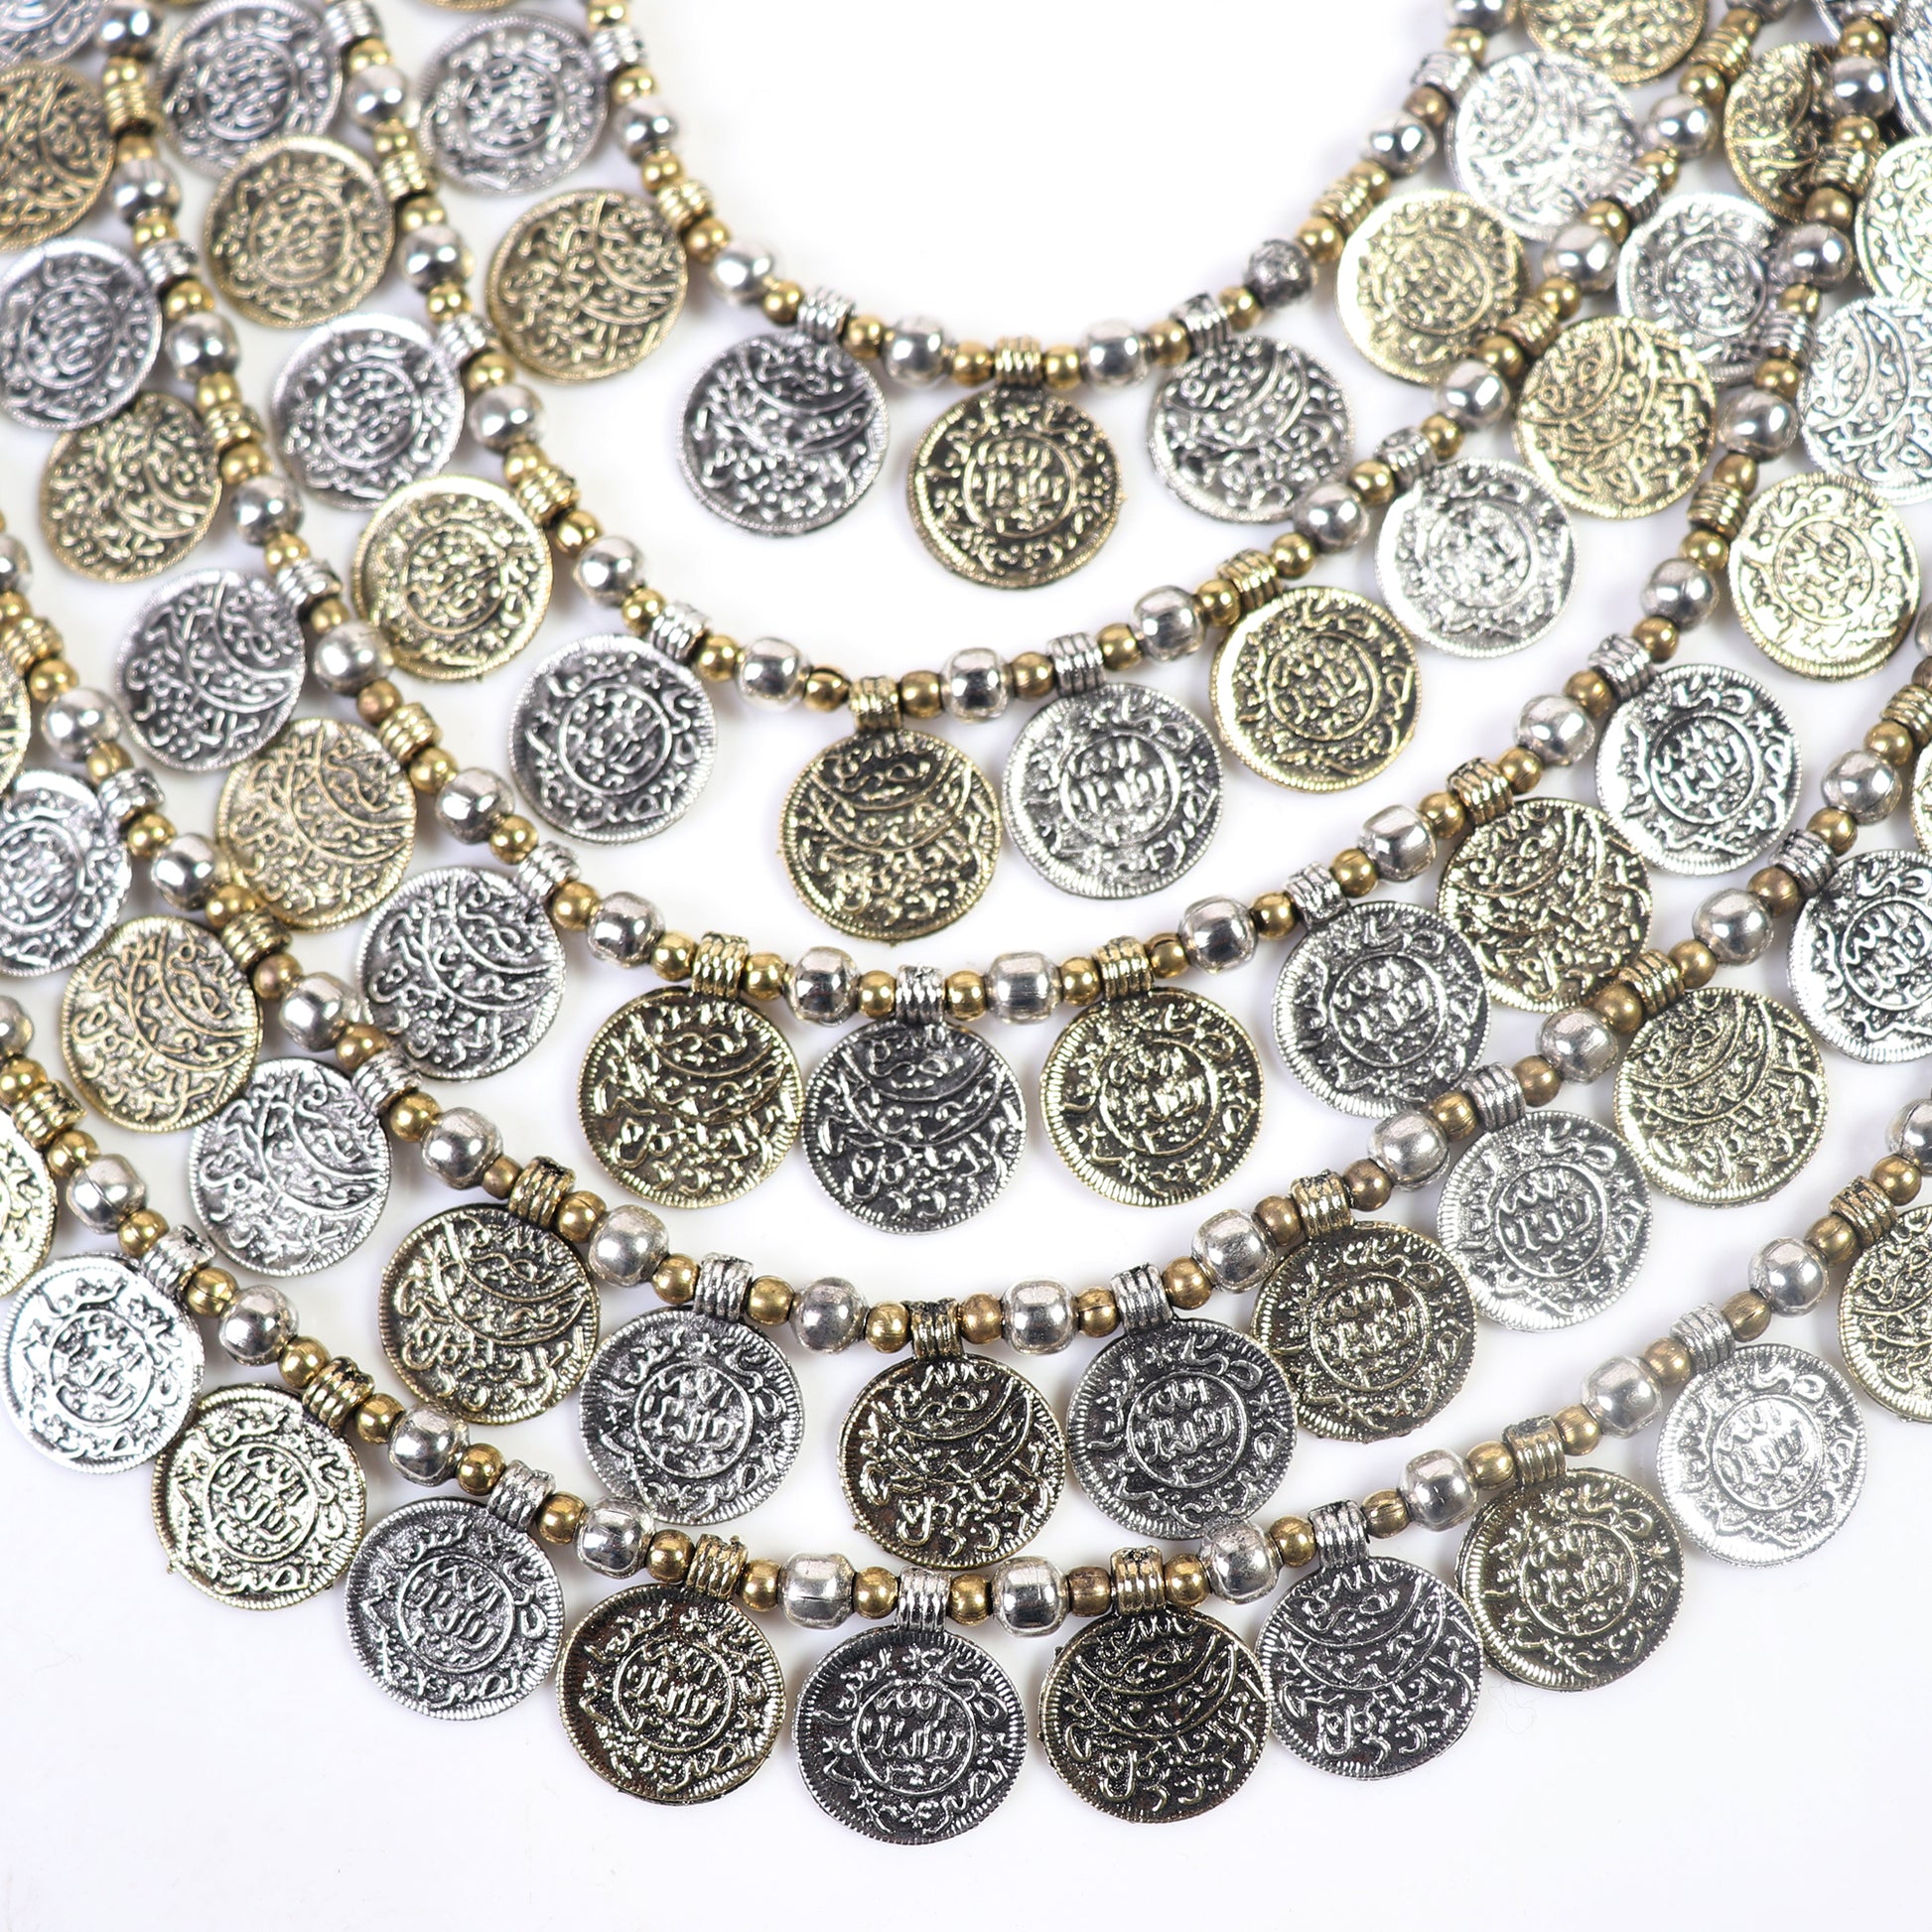 Necklace,Layered Coin Necklace - Cippele Multi Store